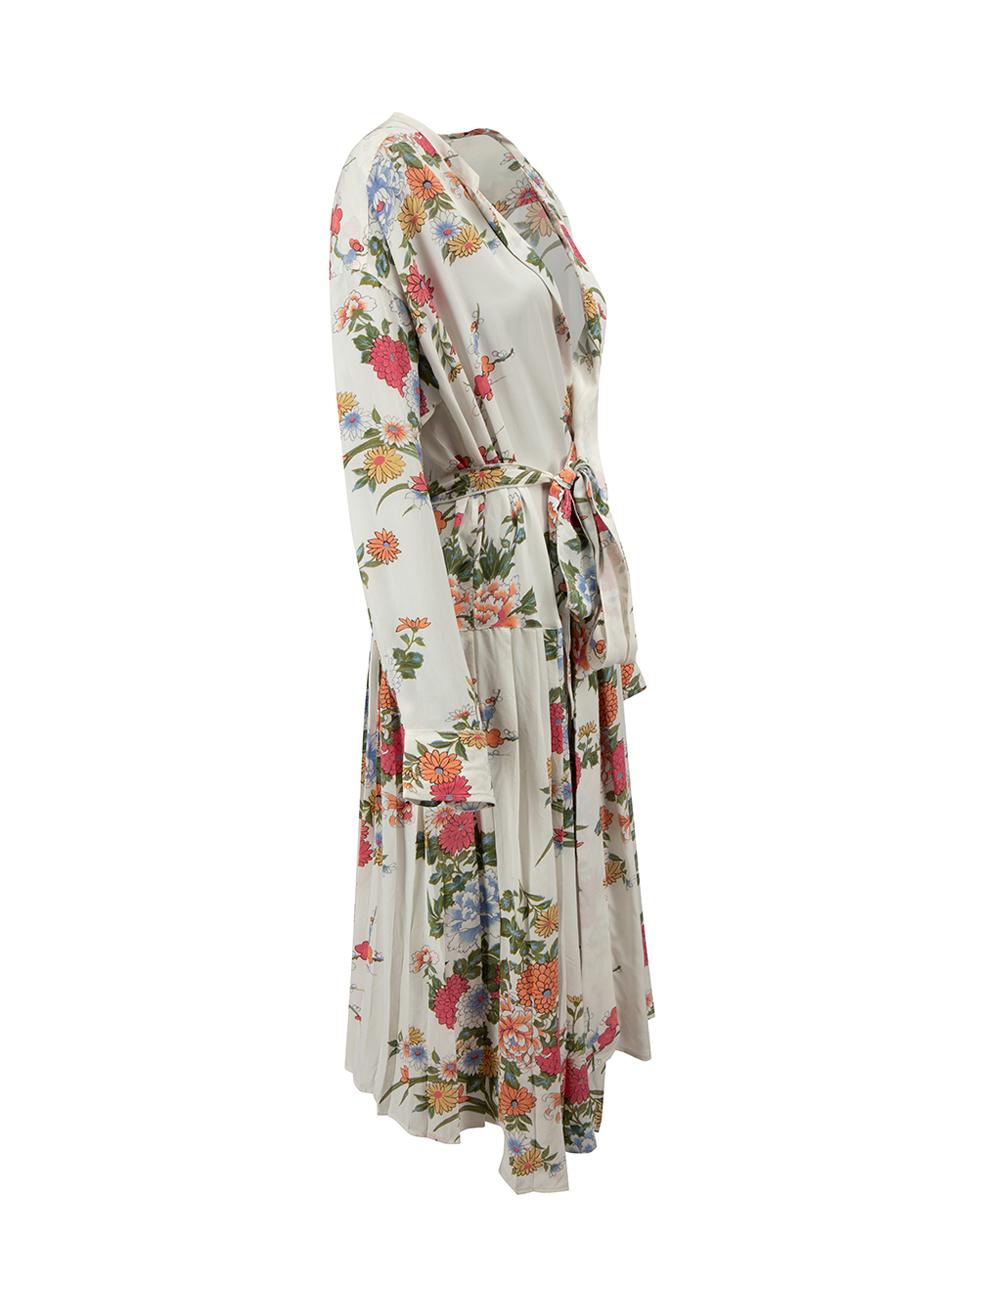 CONDITION is Very good. Hardly any visible wear to dress is evident on this used Isabel Marant designer resale item.



Details


White

Silk

Wrap dress

Floral print

Long sleeves

Knee length

Pleated skirt detail





Made in